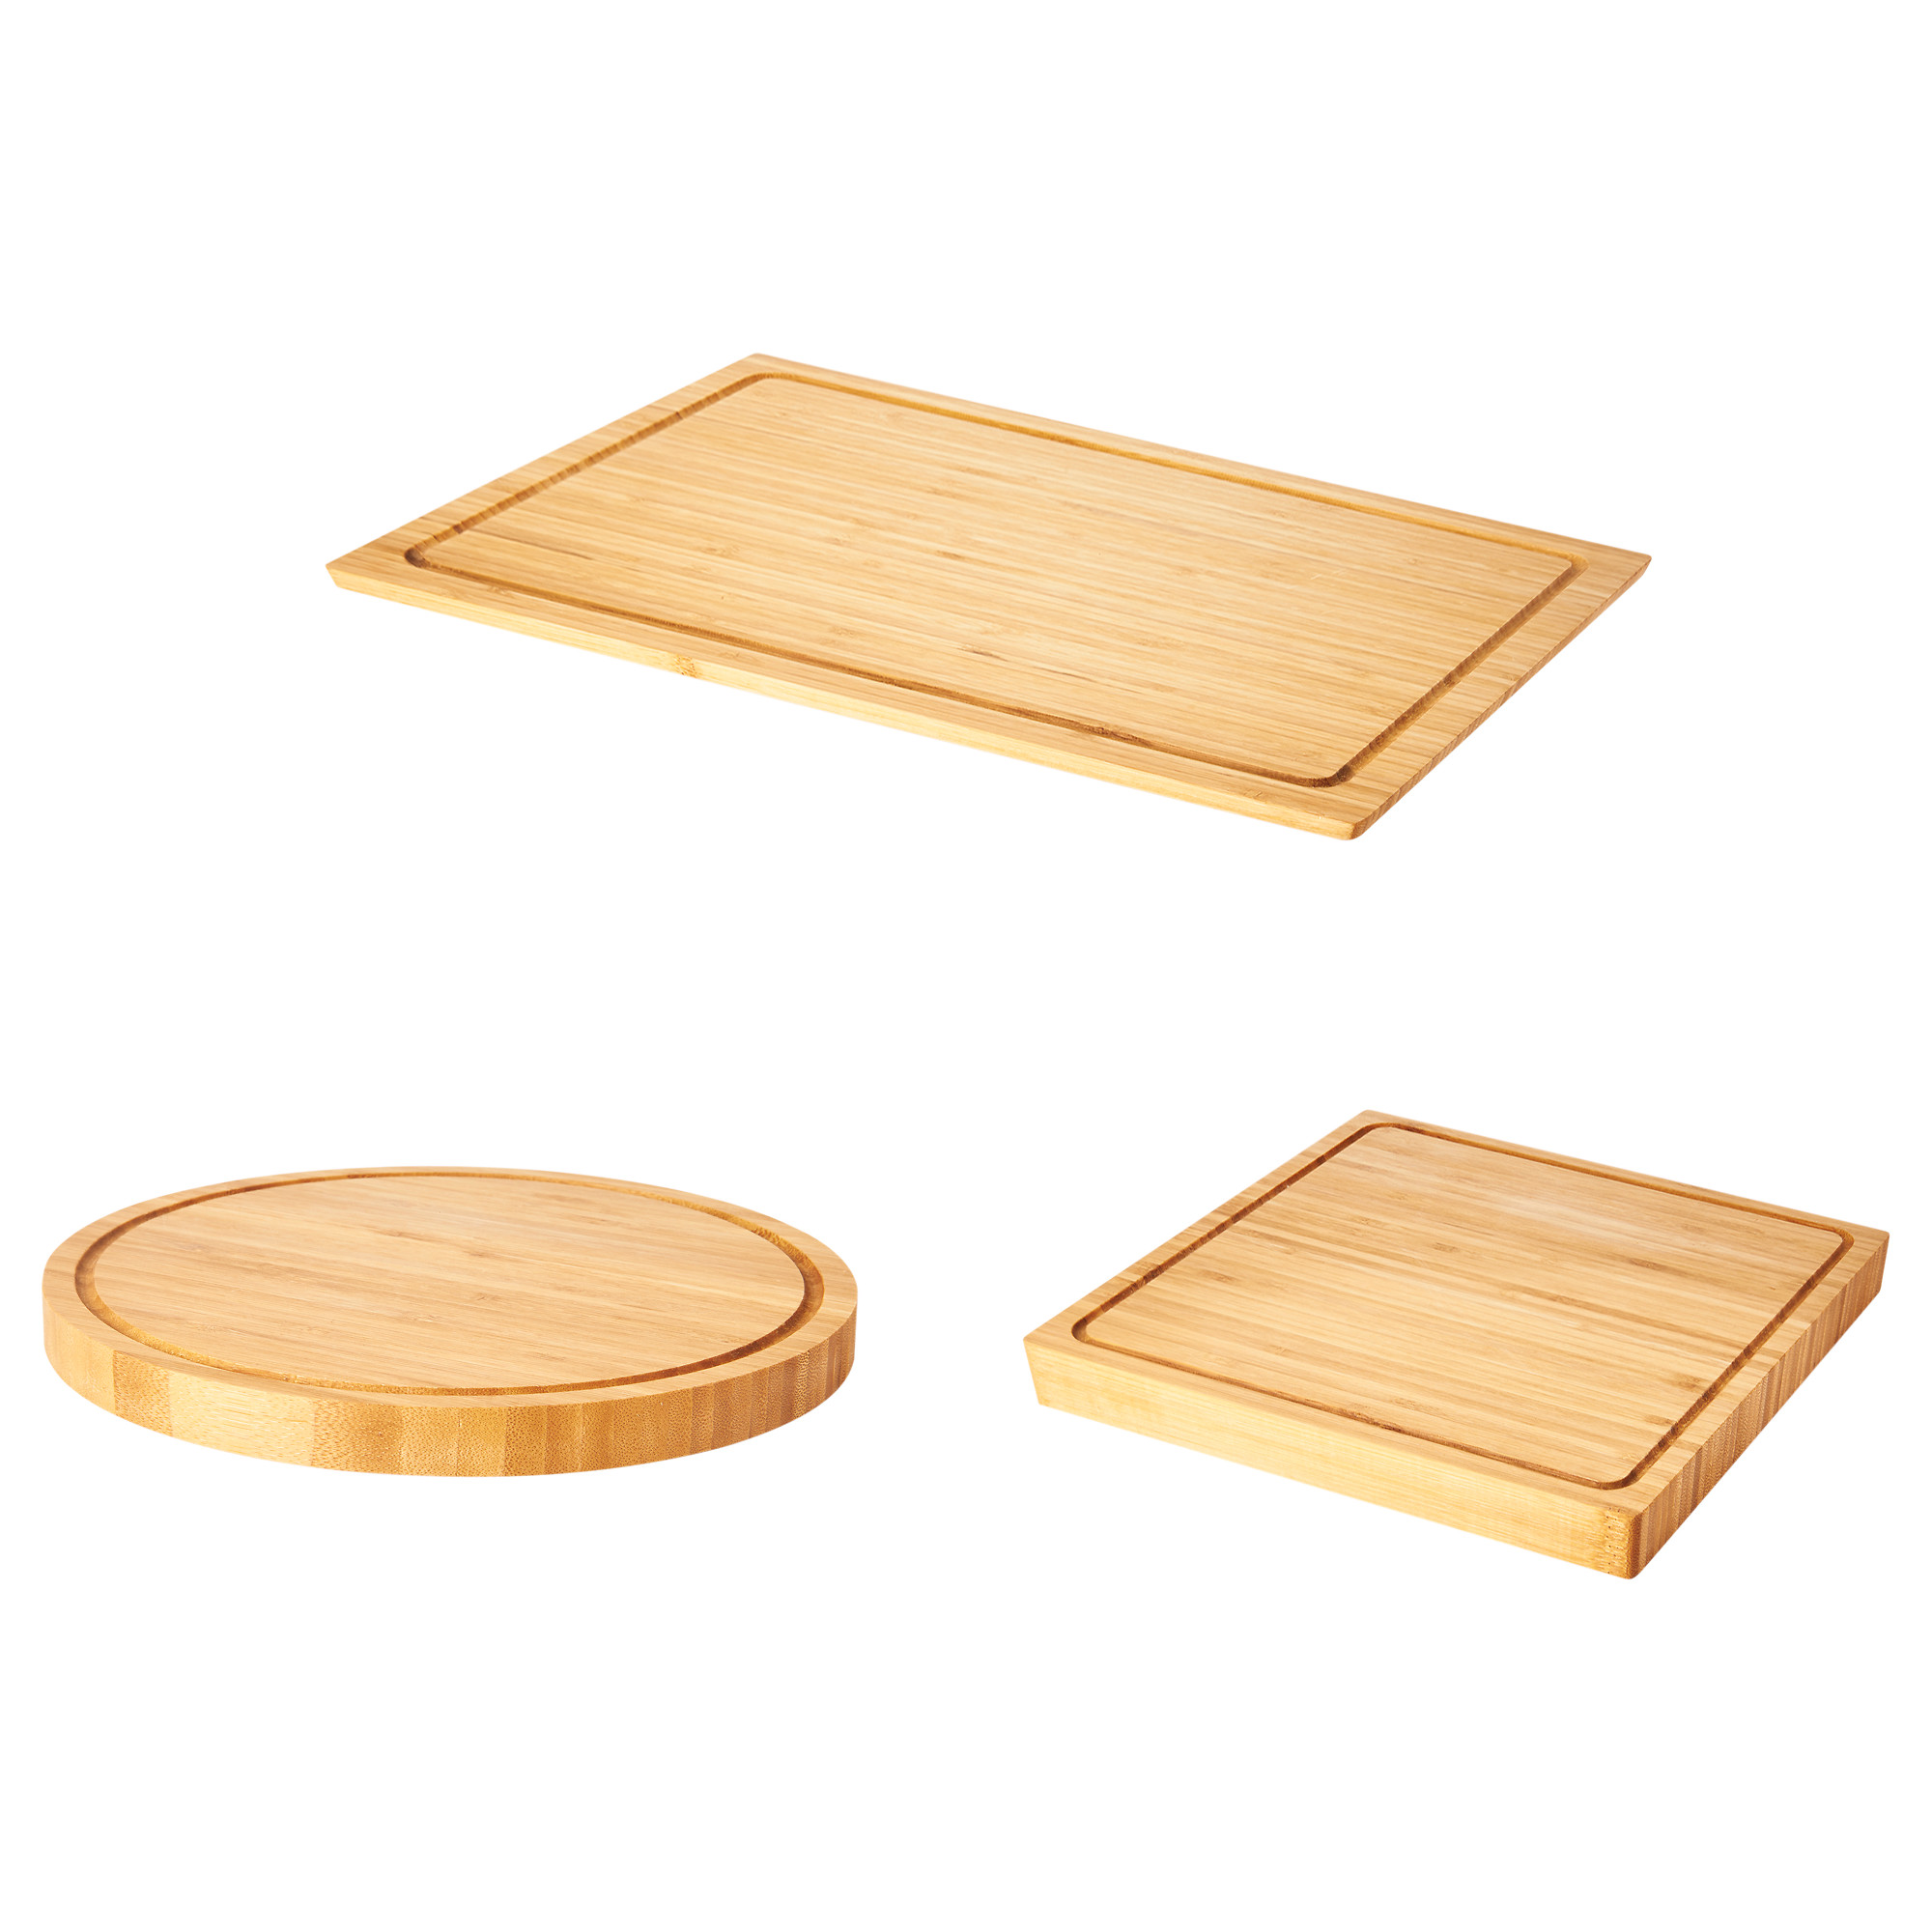 OLEBY chopping board, set of 3